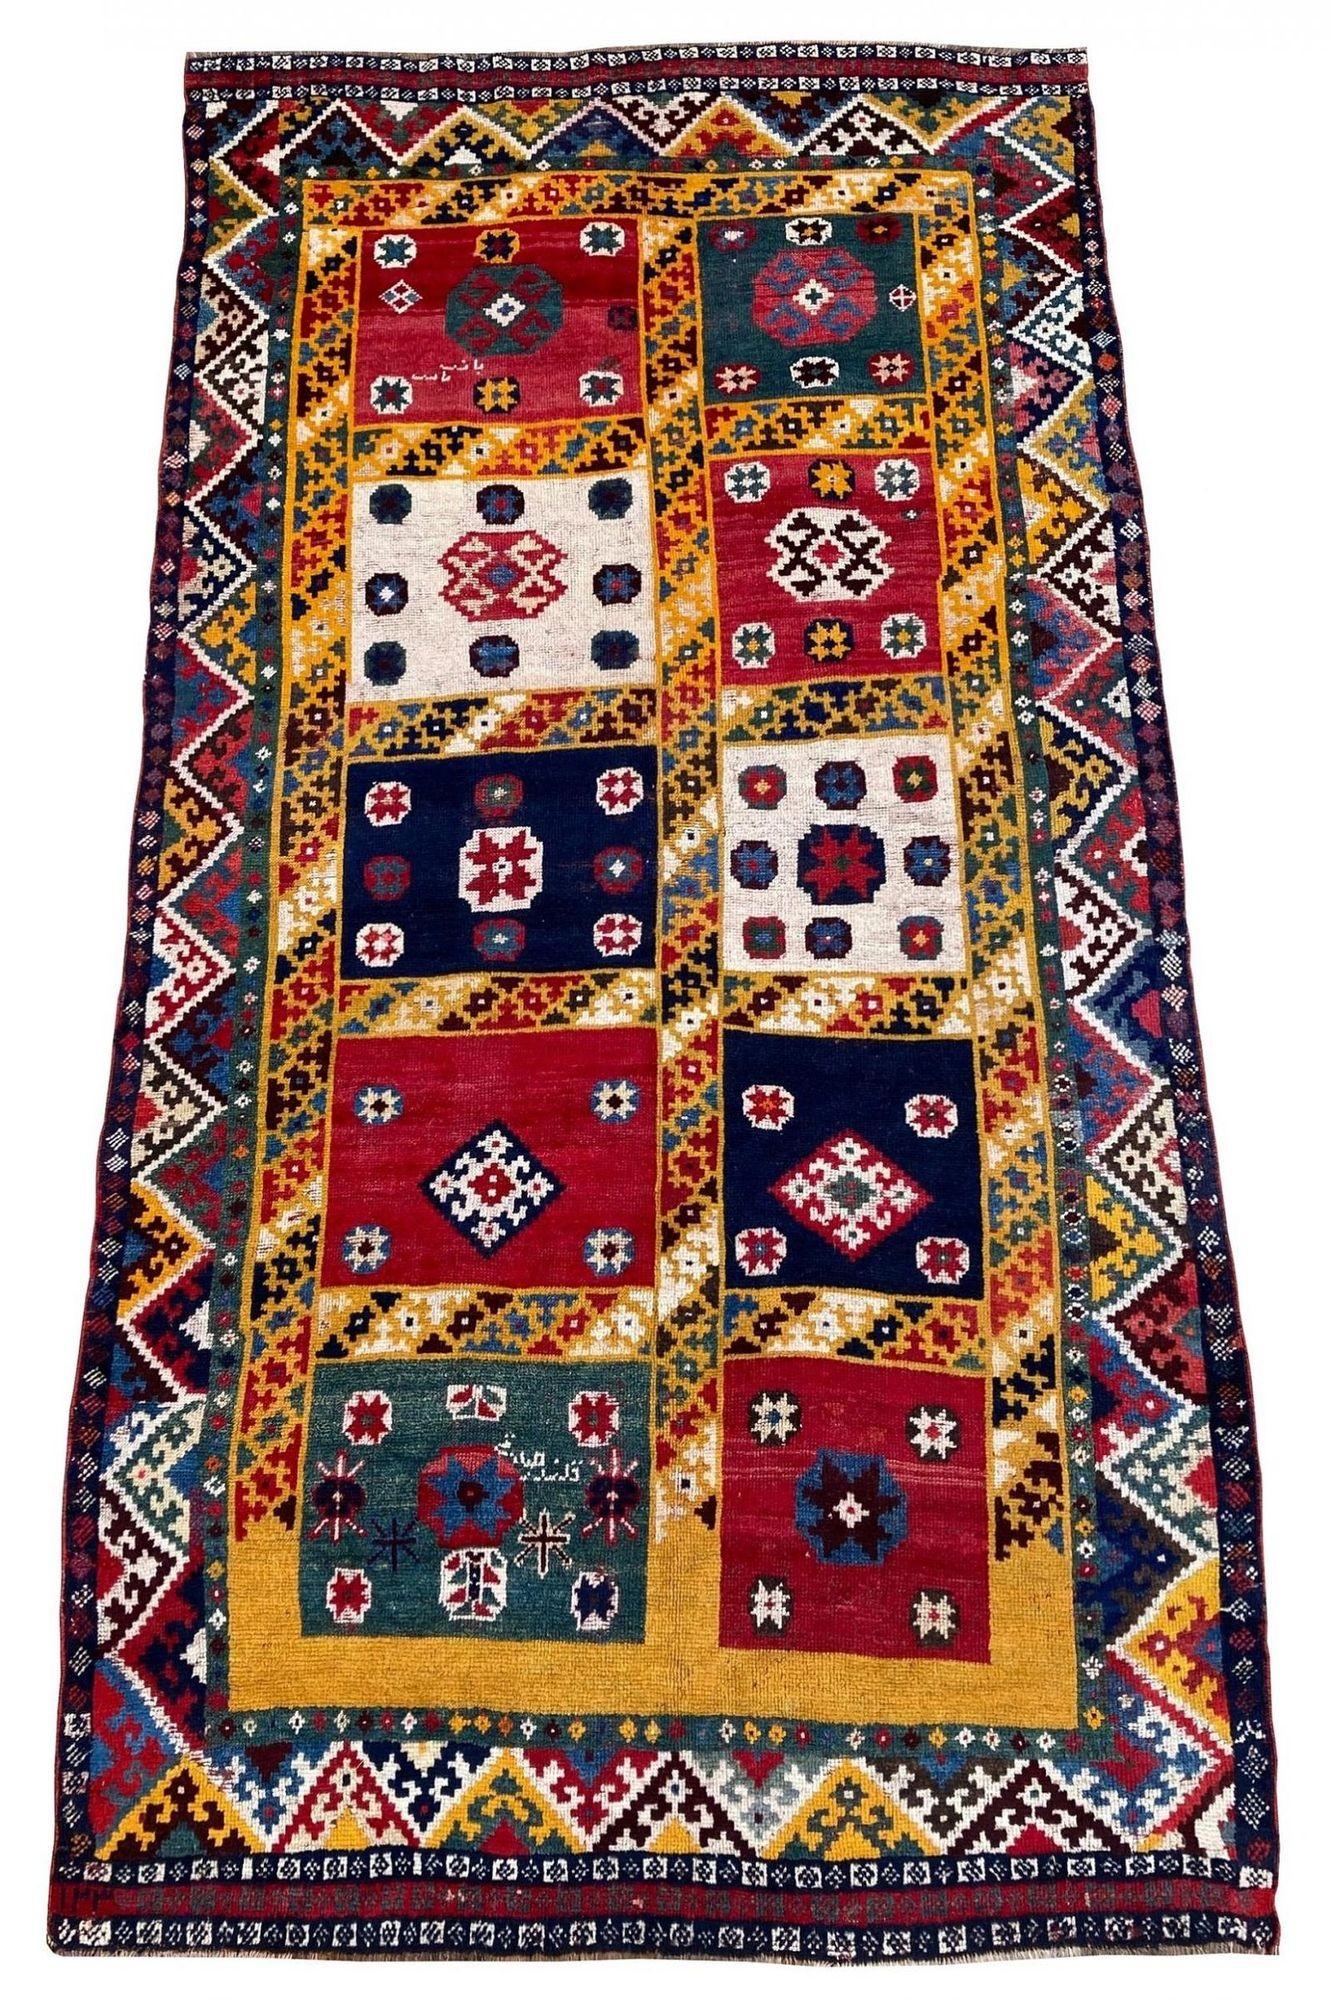 An exceptional antique Gabbeh rug, handwoven by the nomadic Qashqai tribe circa 1900 with a geometrical design on a saffron yellow field and great secondary colours. Signed by the weaver, Galander Sed Gir. There are a couple of interesting elements